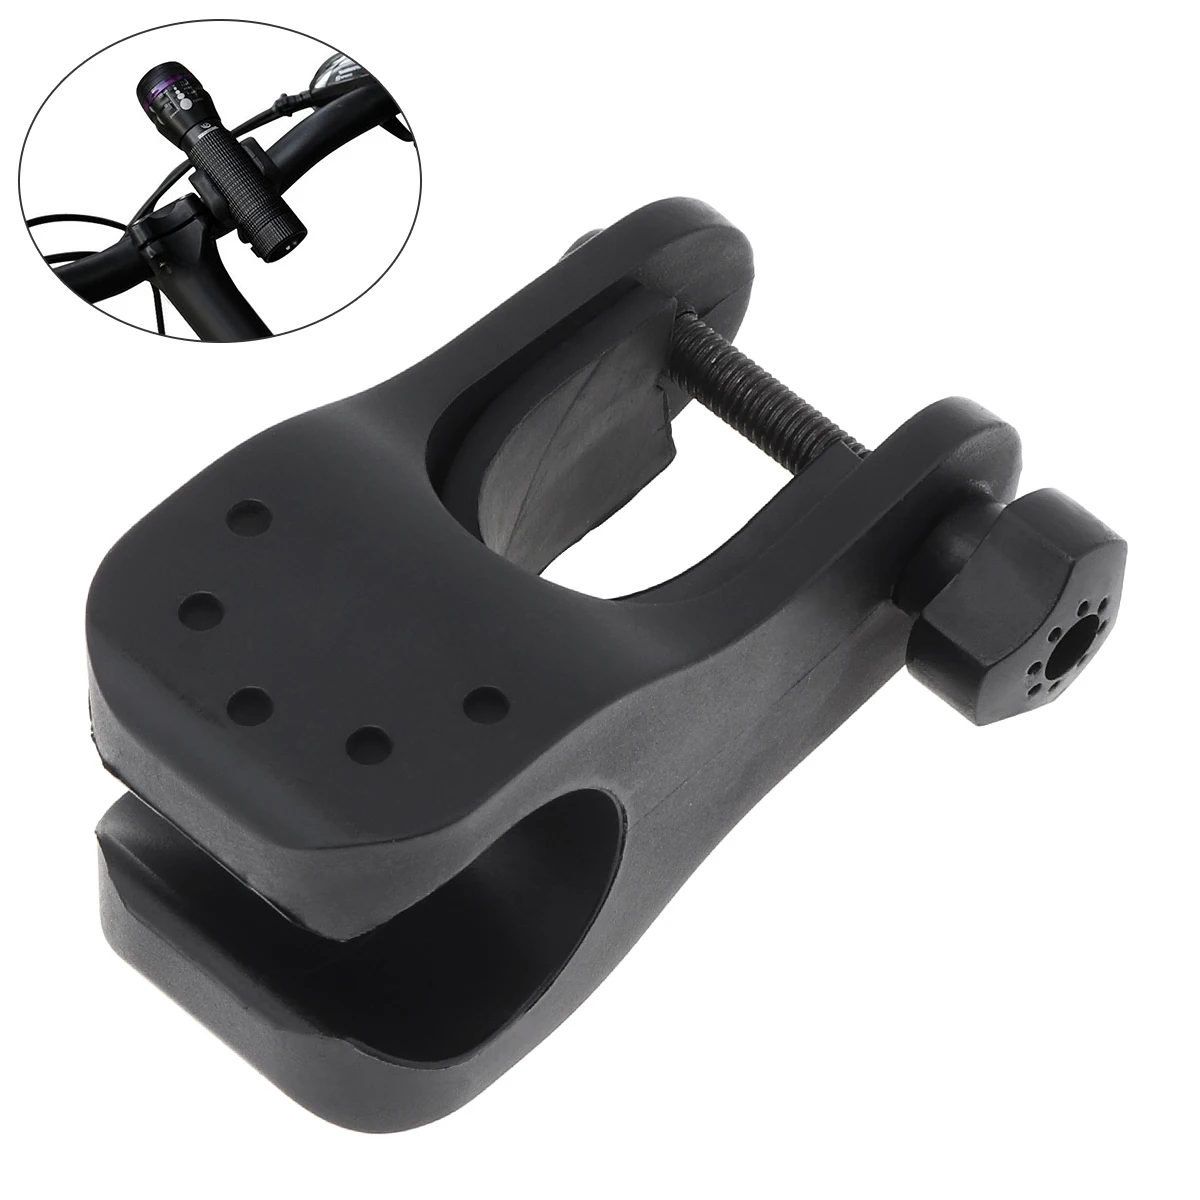 Shatterproof Bicycle Cycle Light Stand Bike Front Mount LED Headlight Holder Clip Rubber for 22-35mm Diameter Flashlight bike lights set usb rechargeable bicycle headlight